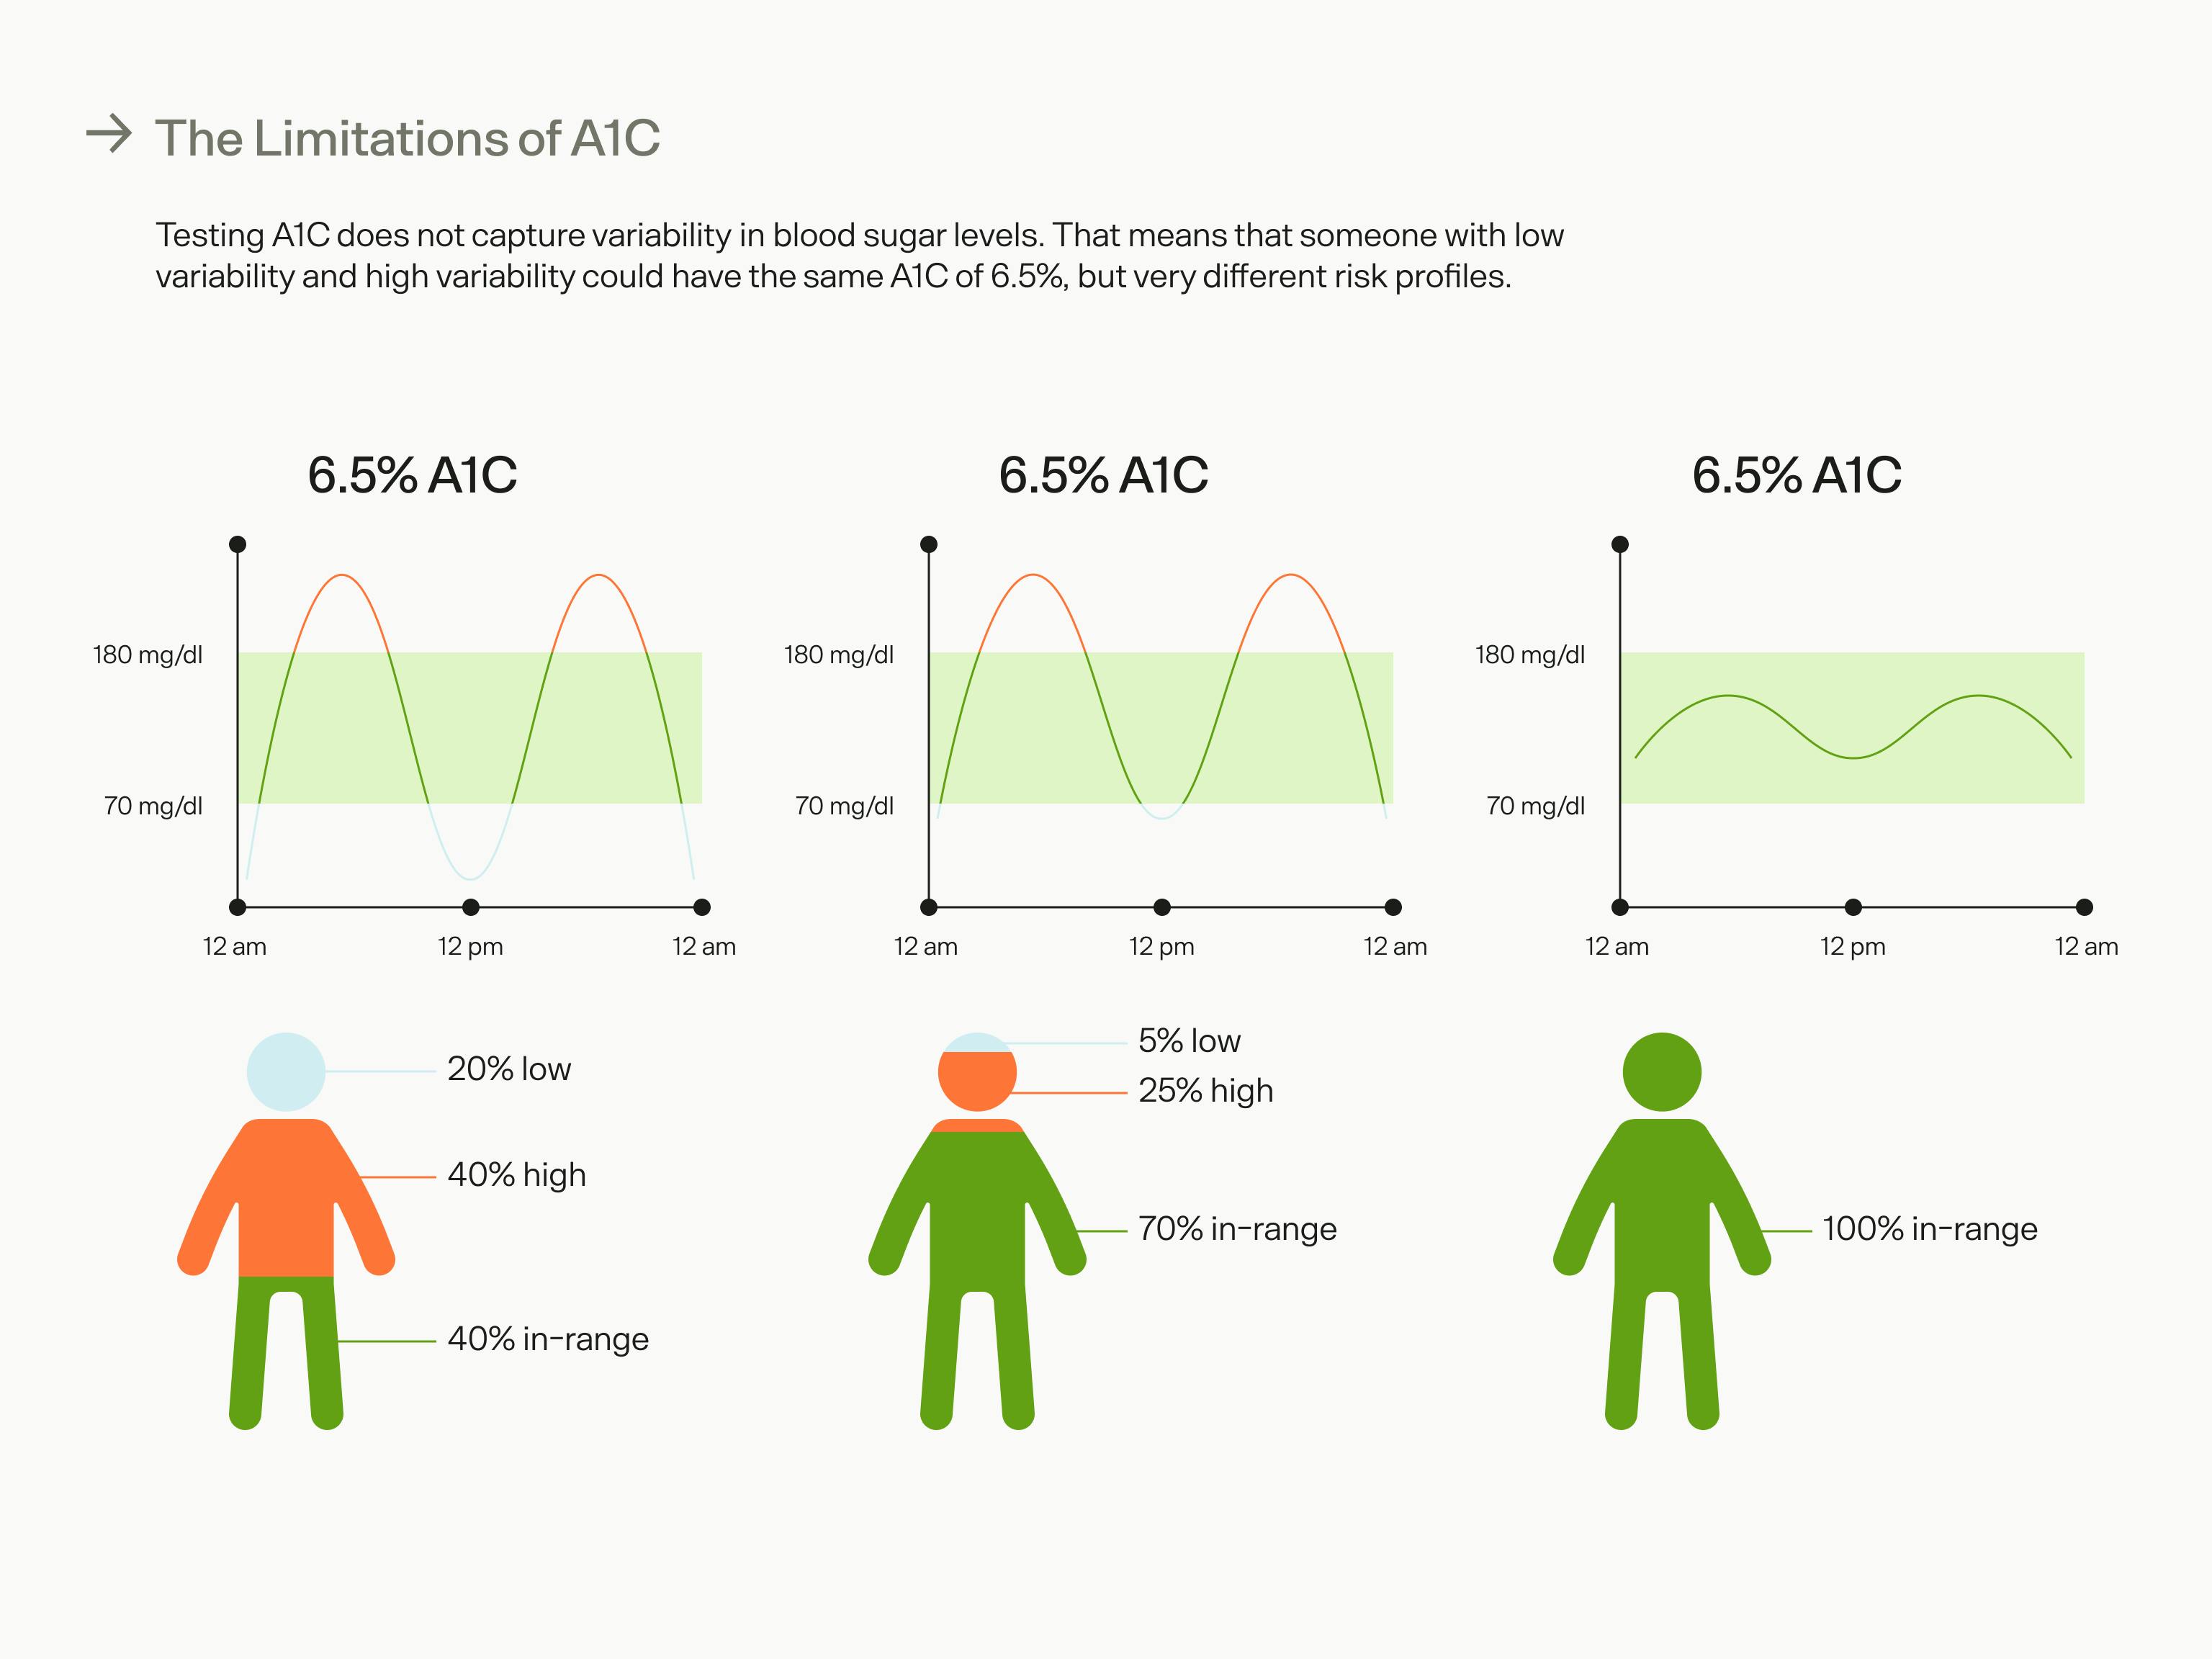 graphic depicting limitations of a1c